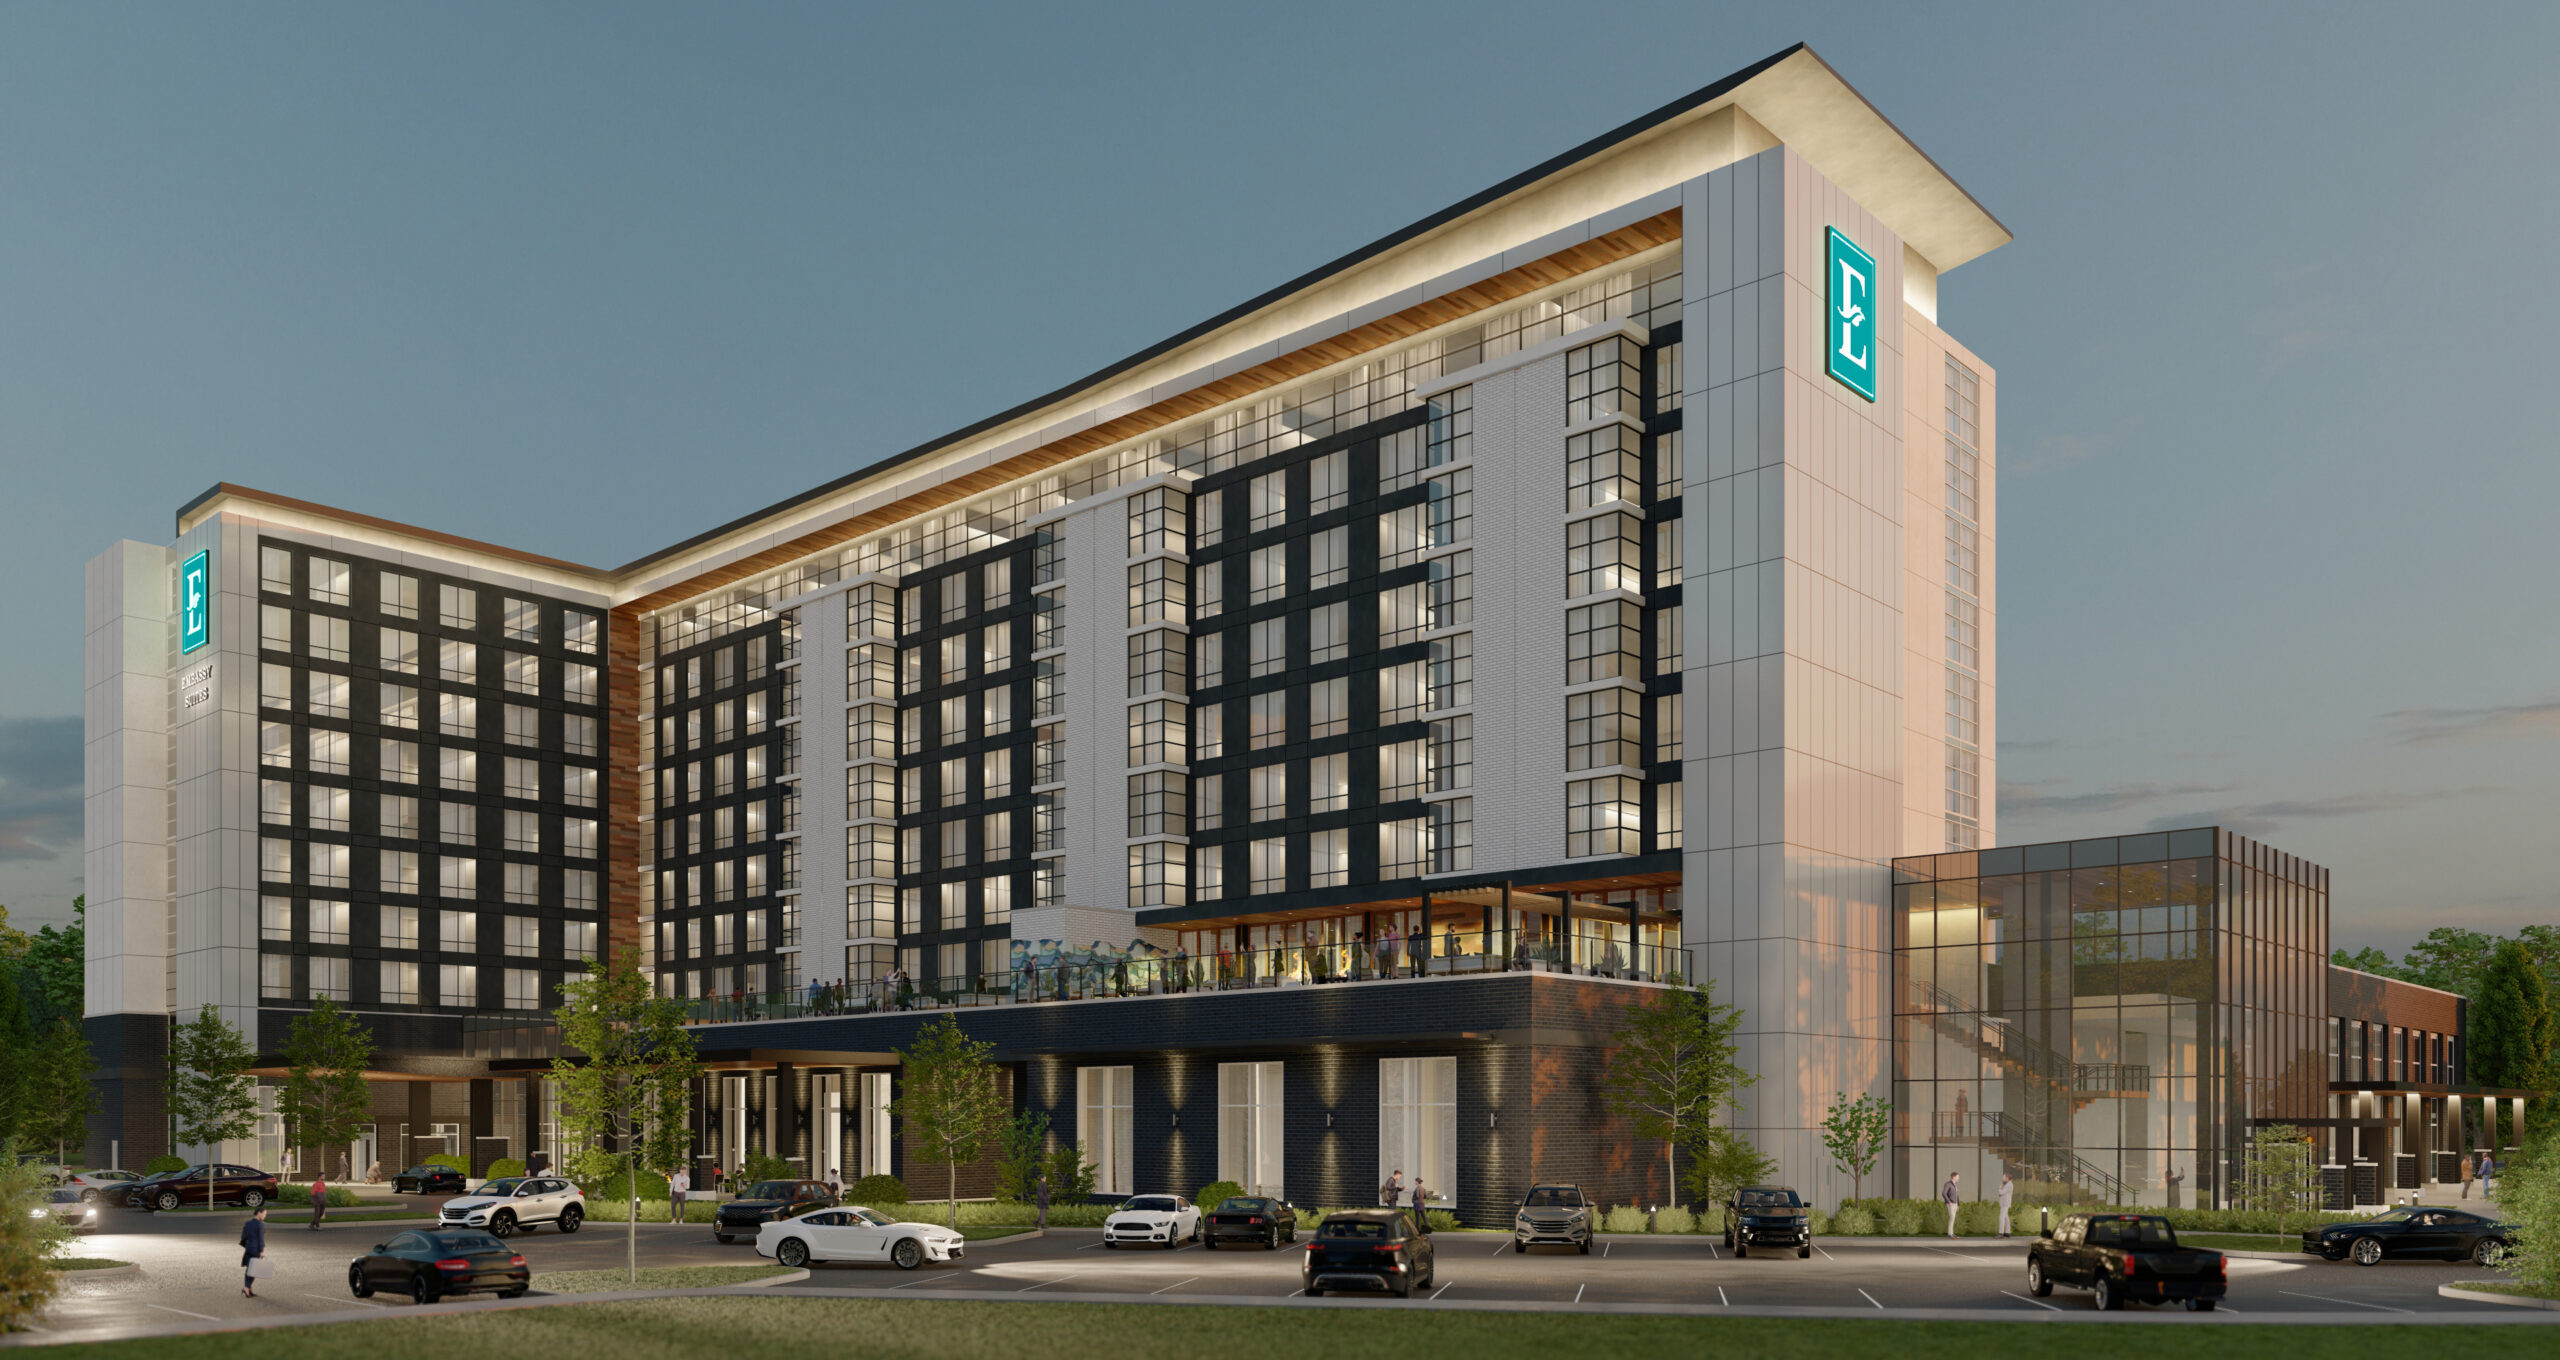 Shameen to build the Embassy Suites Hotel in Chesterfield